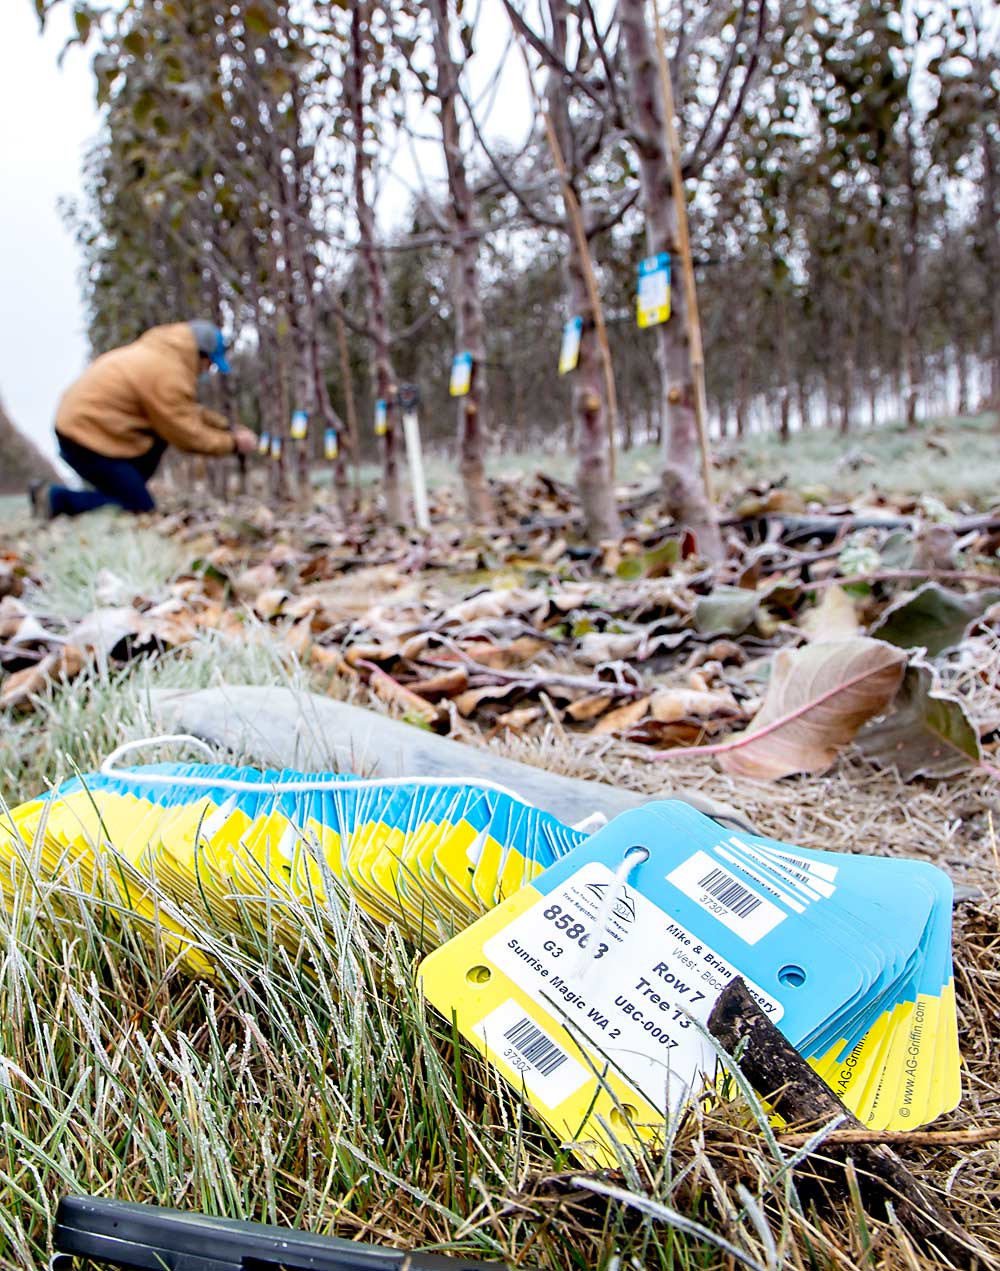 Bennett Mayo, manager of Mike and Brian’s Nursery in Wapato, Washington, demonstrates labeling WA 2 scion trees with state certification tags in December. The WA 2 is on a path of commercial growth less ambitious than its more famous cousin, the WA 38. (Ross Courtney/Good Fruit Grower)